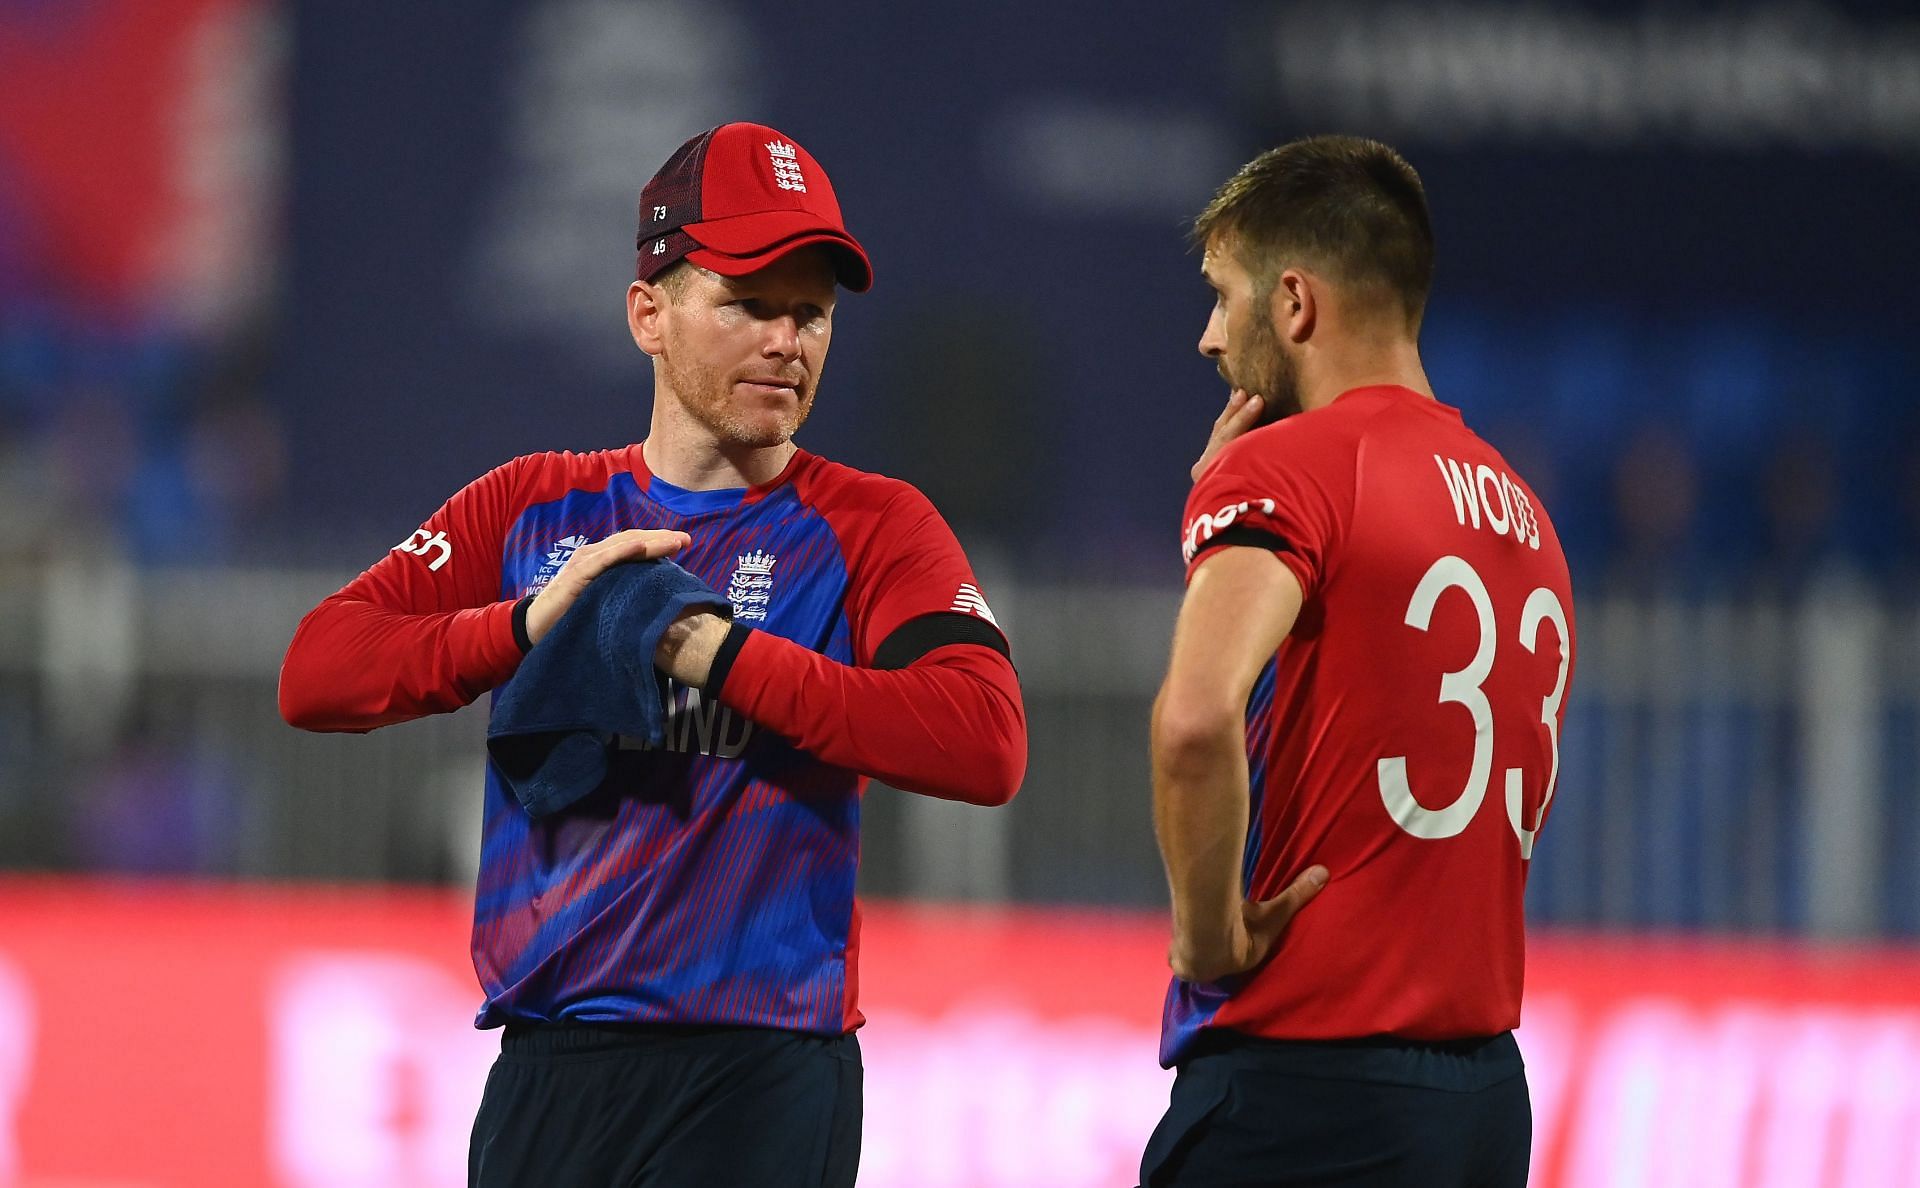 Mark Wood believes defeat to South Africa will keep the England team grounded as they attempt to regroup ahead T20 World Cup semifinal &quot;शर्म की बात है कि हम मैच में हार